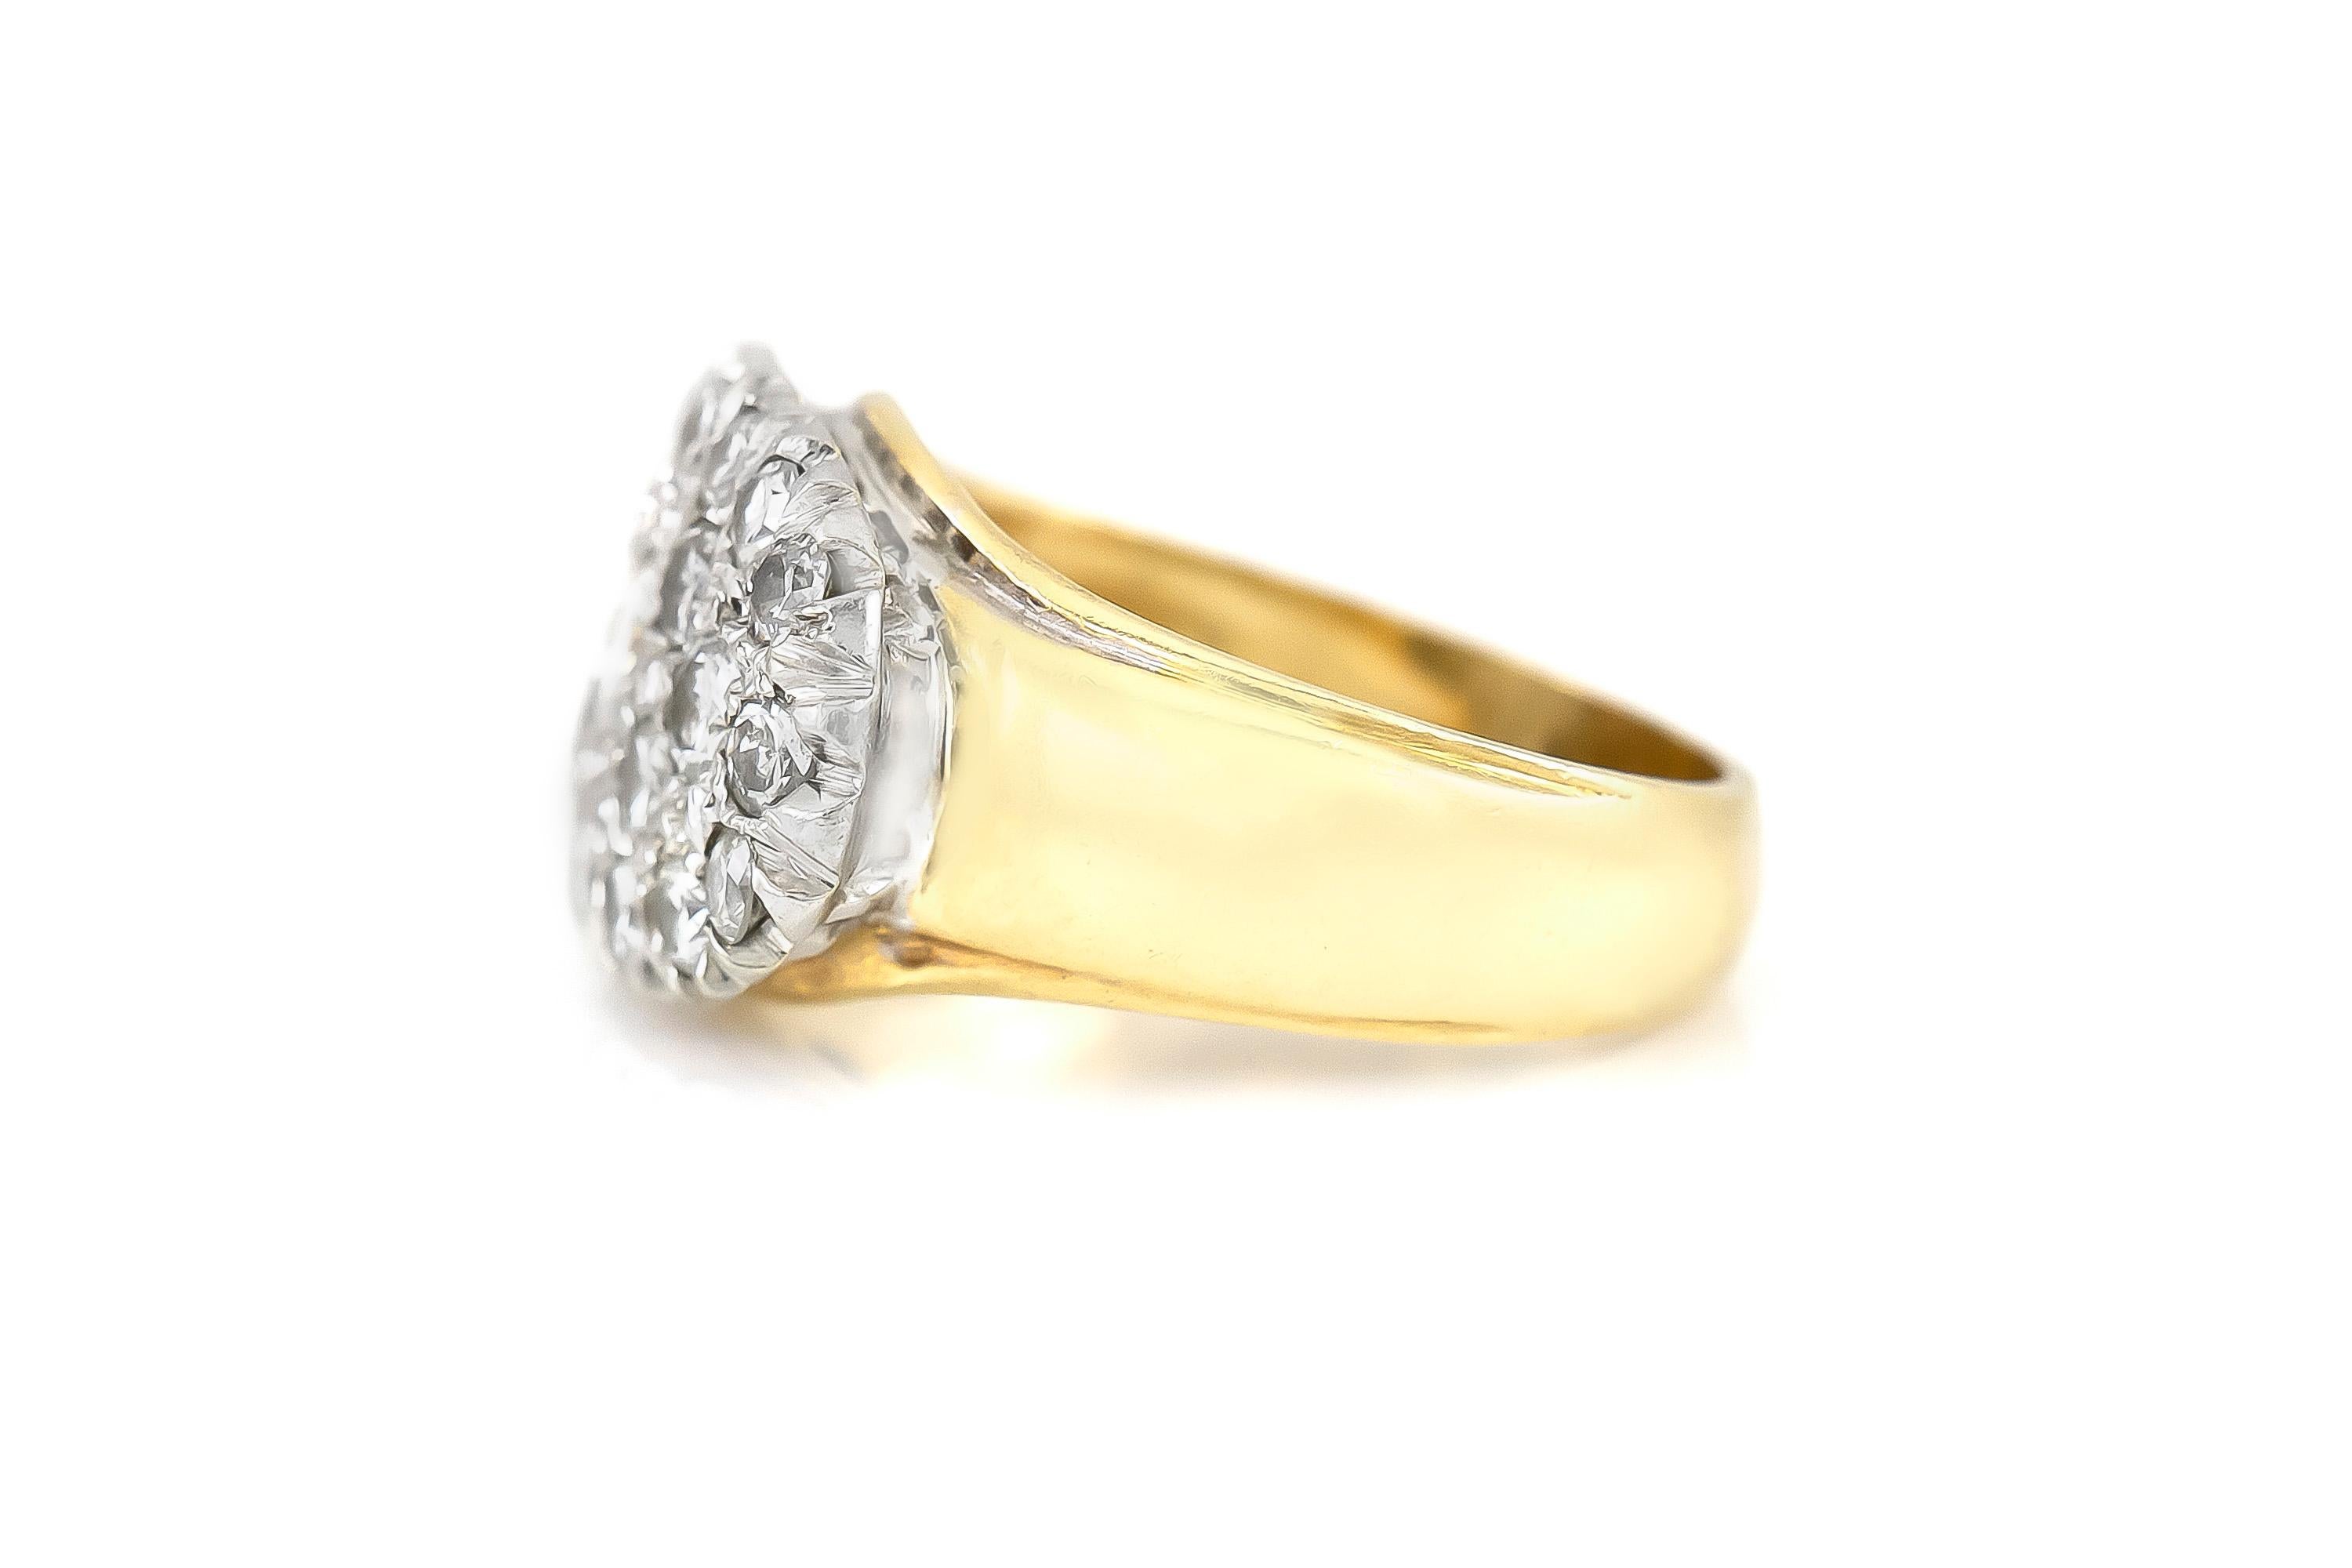 The ring is finely crafted in 14 yellow gold with diamonds weighing appriximately total of 2.00 carat.
Circa 1900.